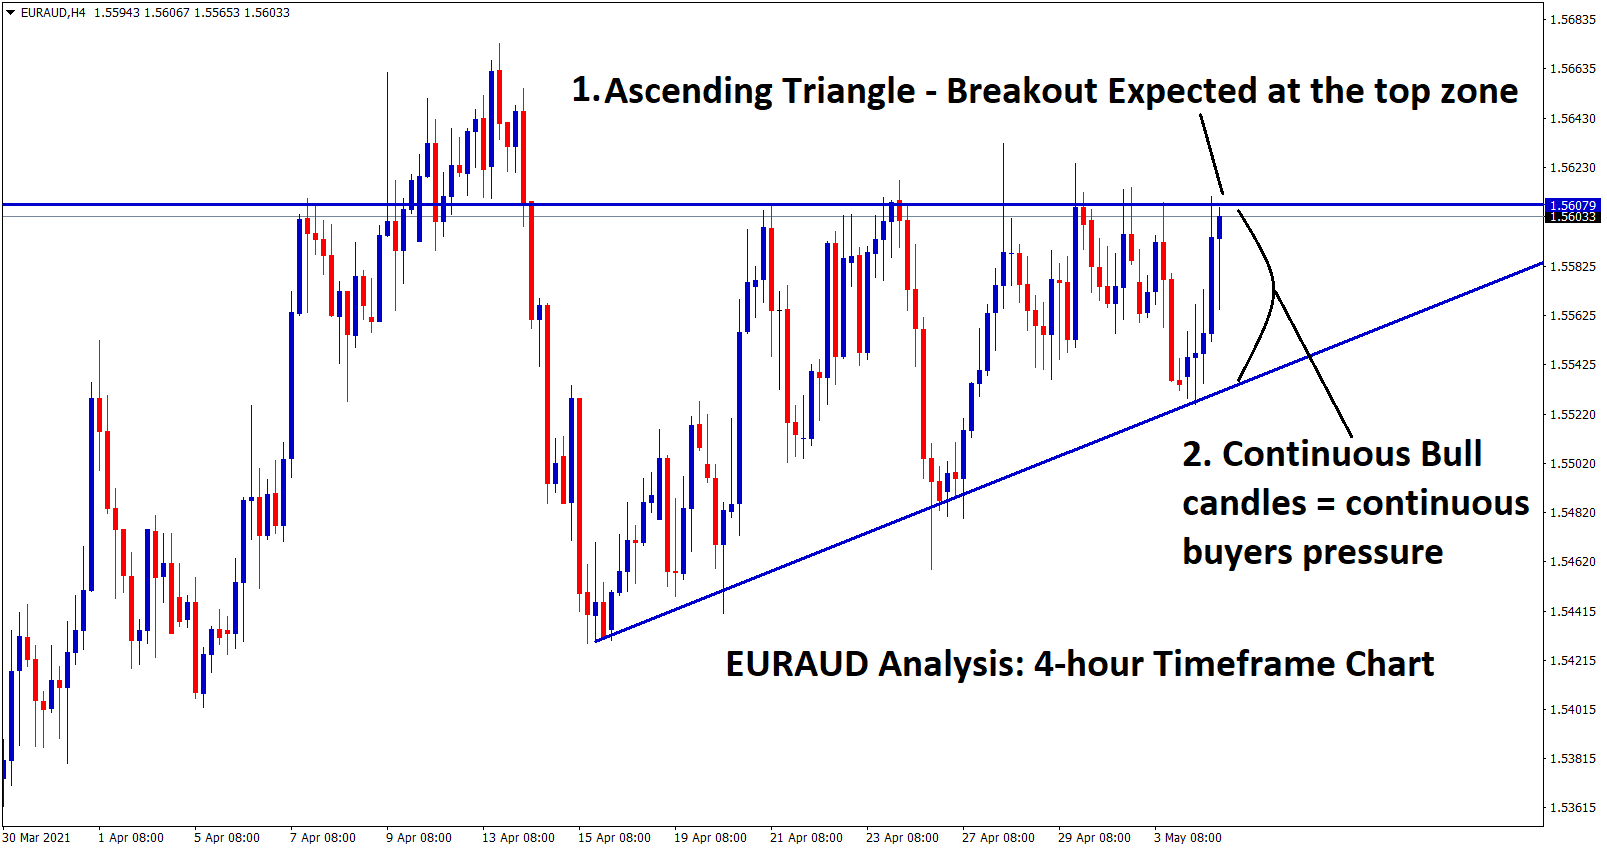 EURAUD Ascending Triangle breakout expected at the top